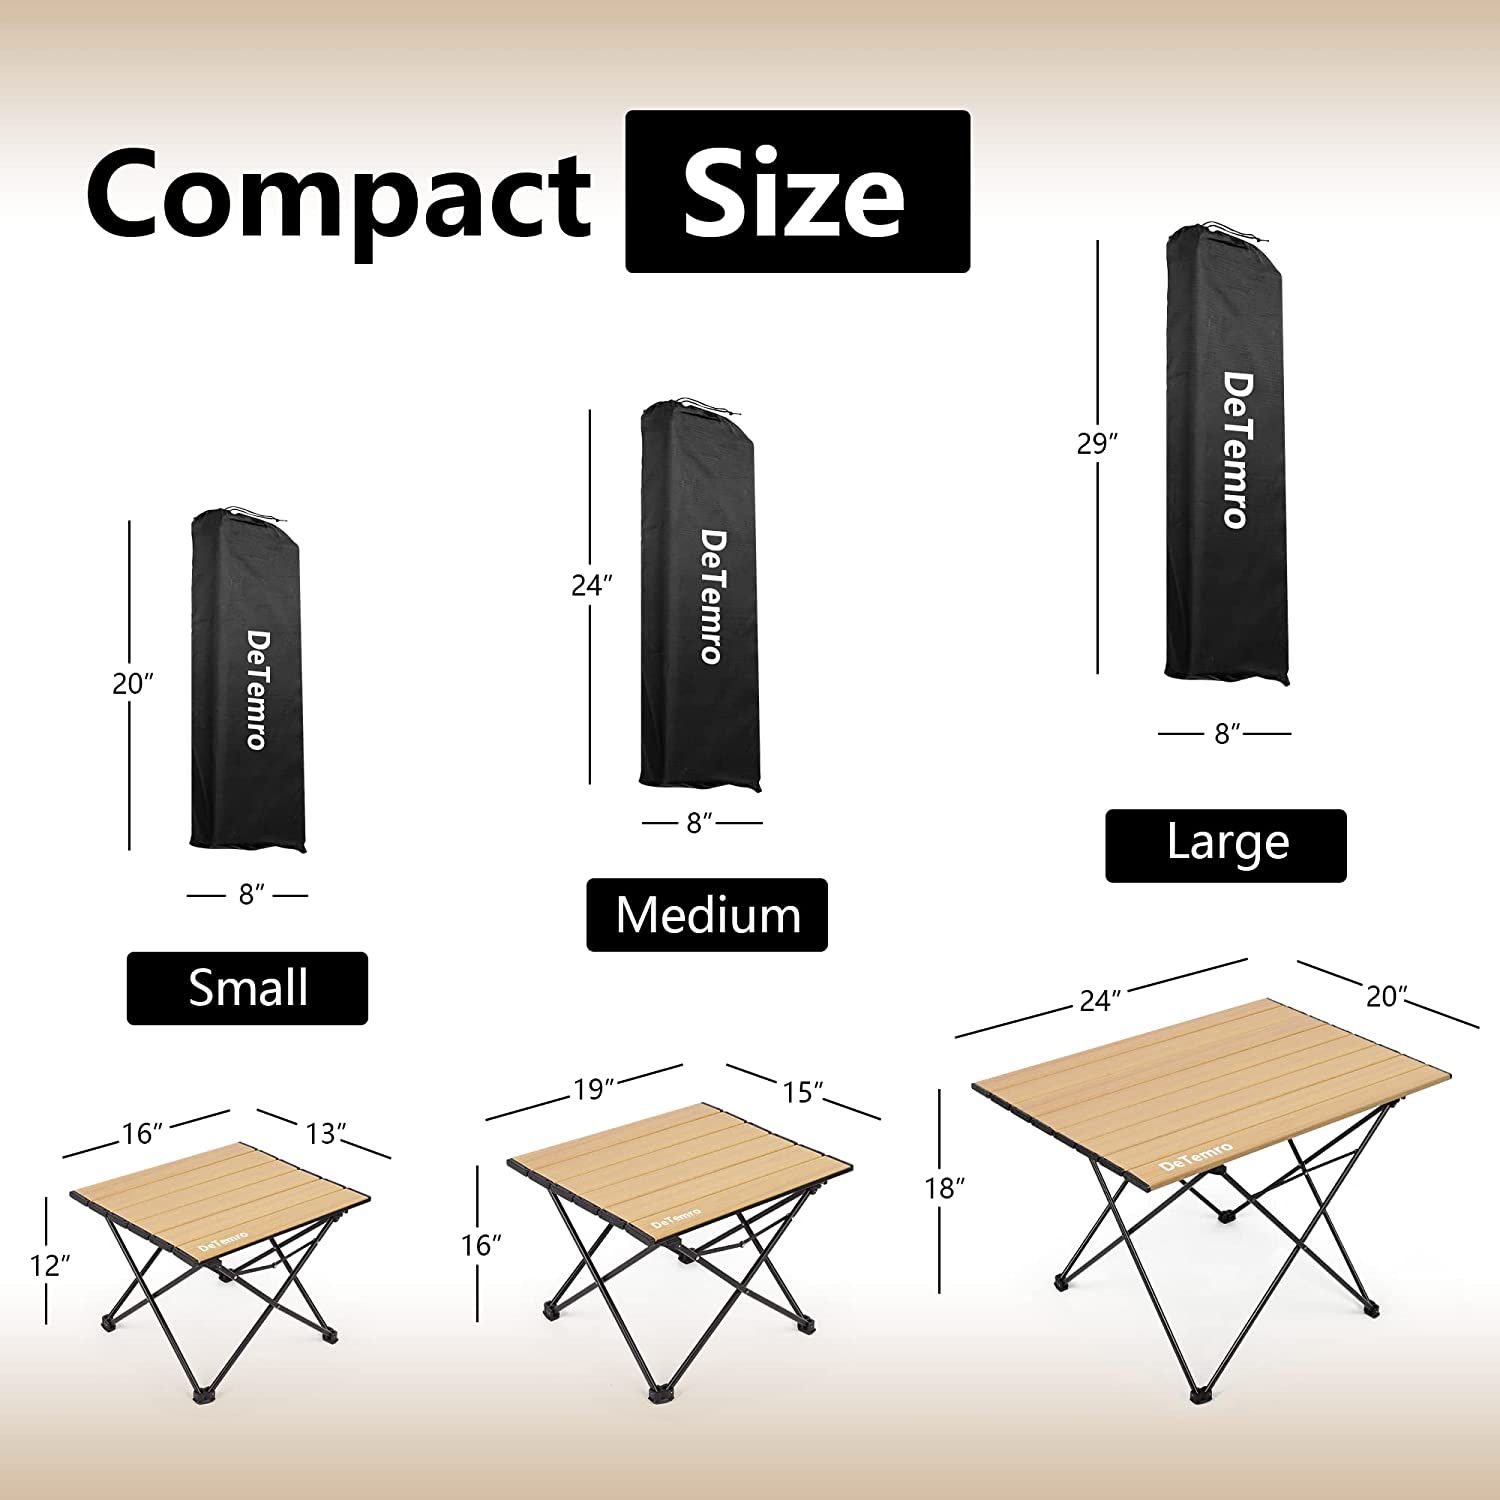 Folding Camping Table, Portable Camping Gear Aluminum Picnic Table with Carry Bag, Ultralight Foldable Camp Table Beach Table for Outdoor Cooking, Pic